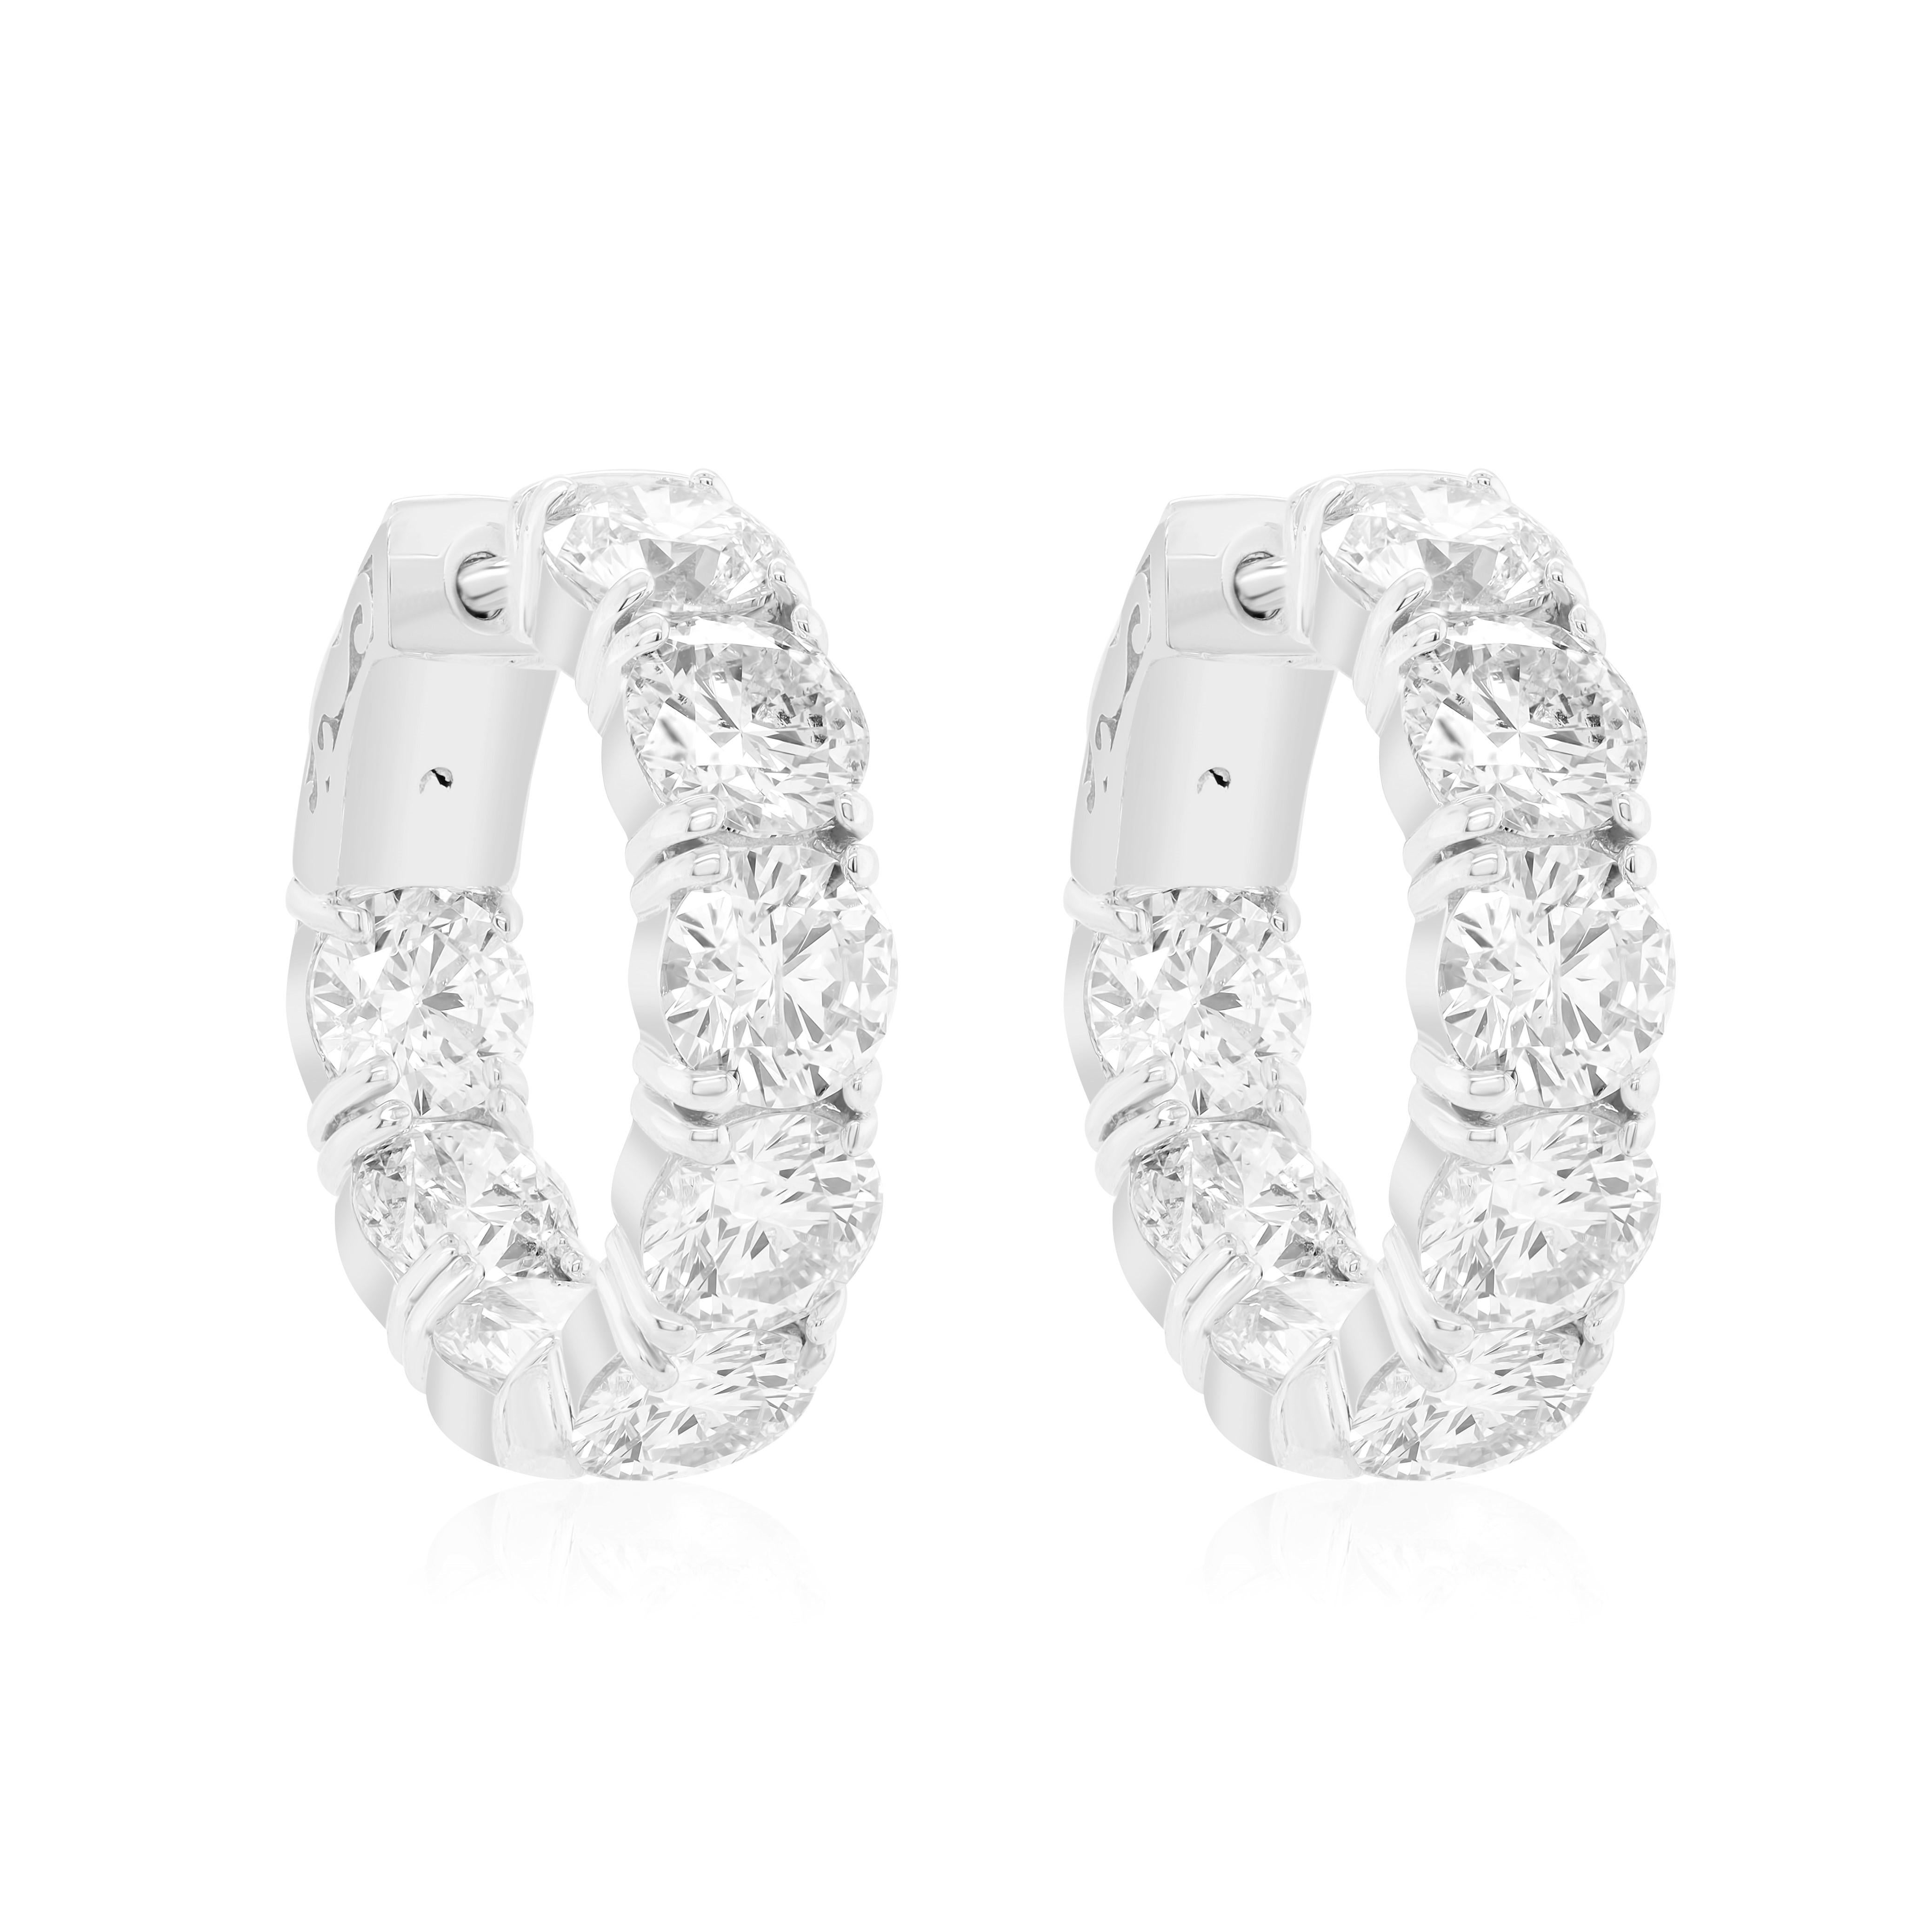 18K White Gold Diamond Earrings featuring 8.15 Carat T.W. of Natural  and White Diamonds
0.50 Carats Each Diamond 

Underline your look with this sharp 18K White and DIAMOND Earrings. High quality Diamonds. This Earrings will underline your